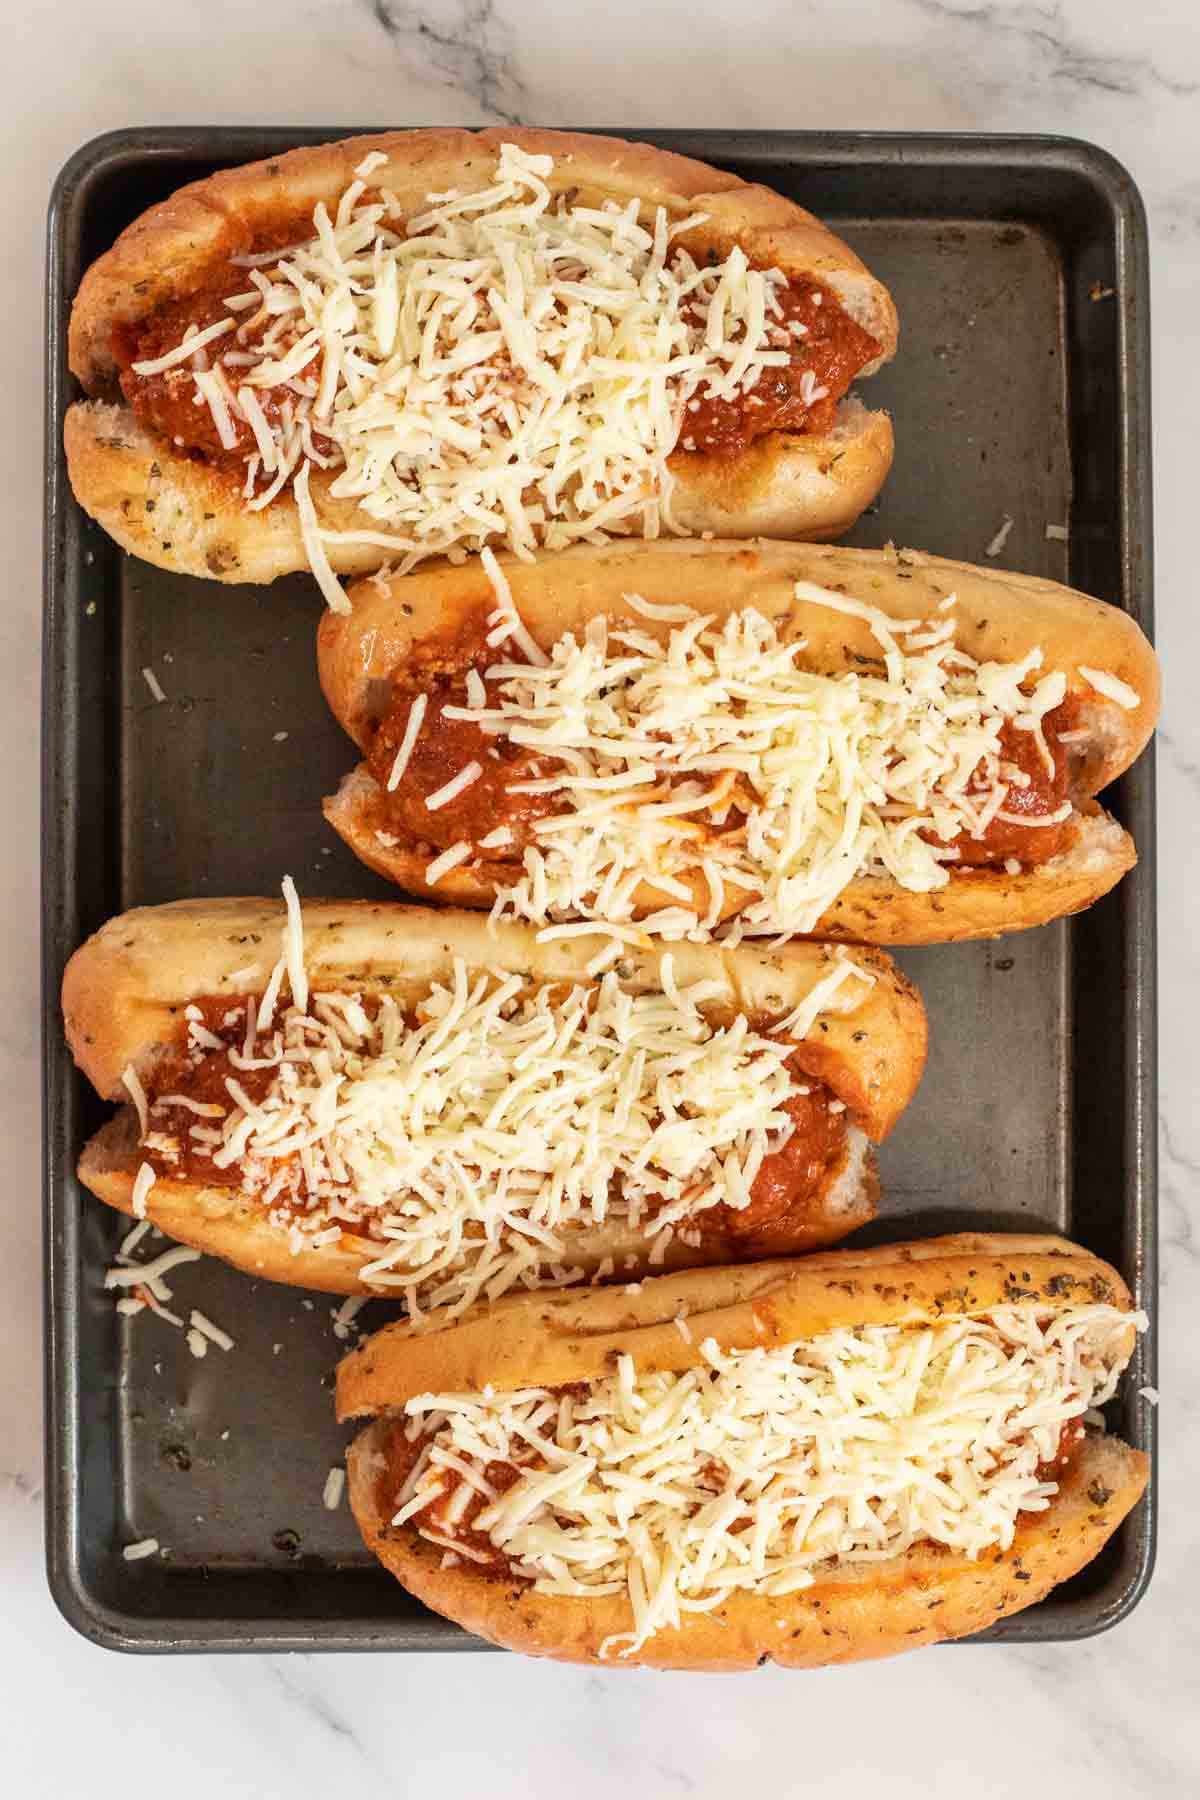 The meatball subs topped with cheese. 